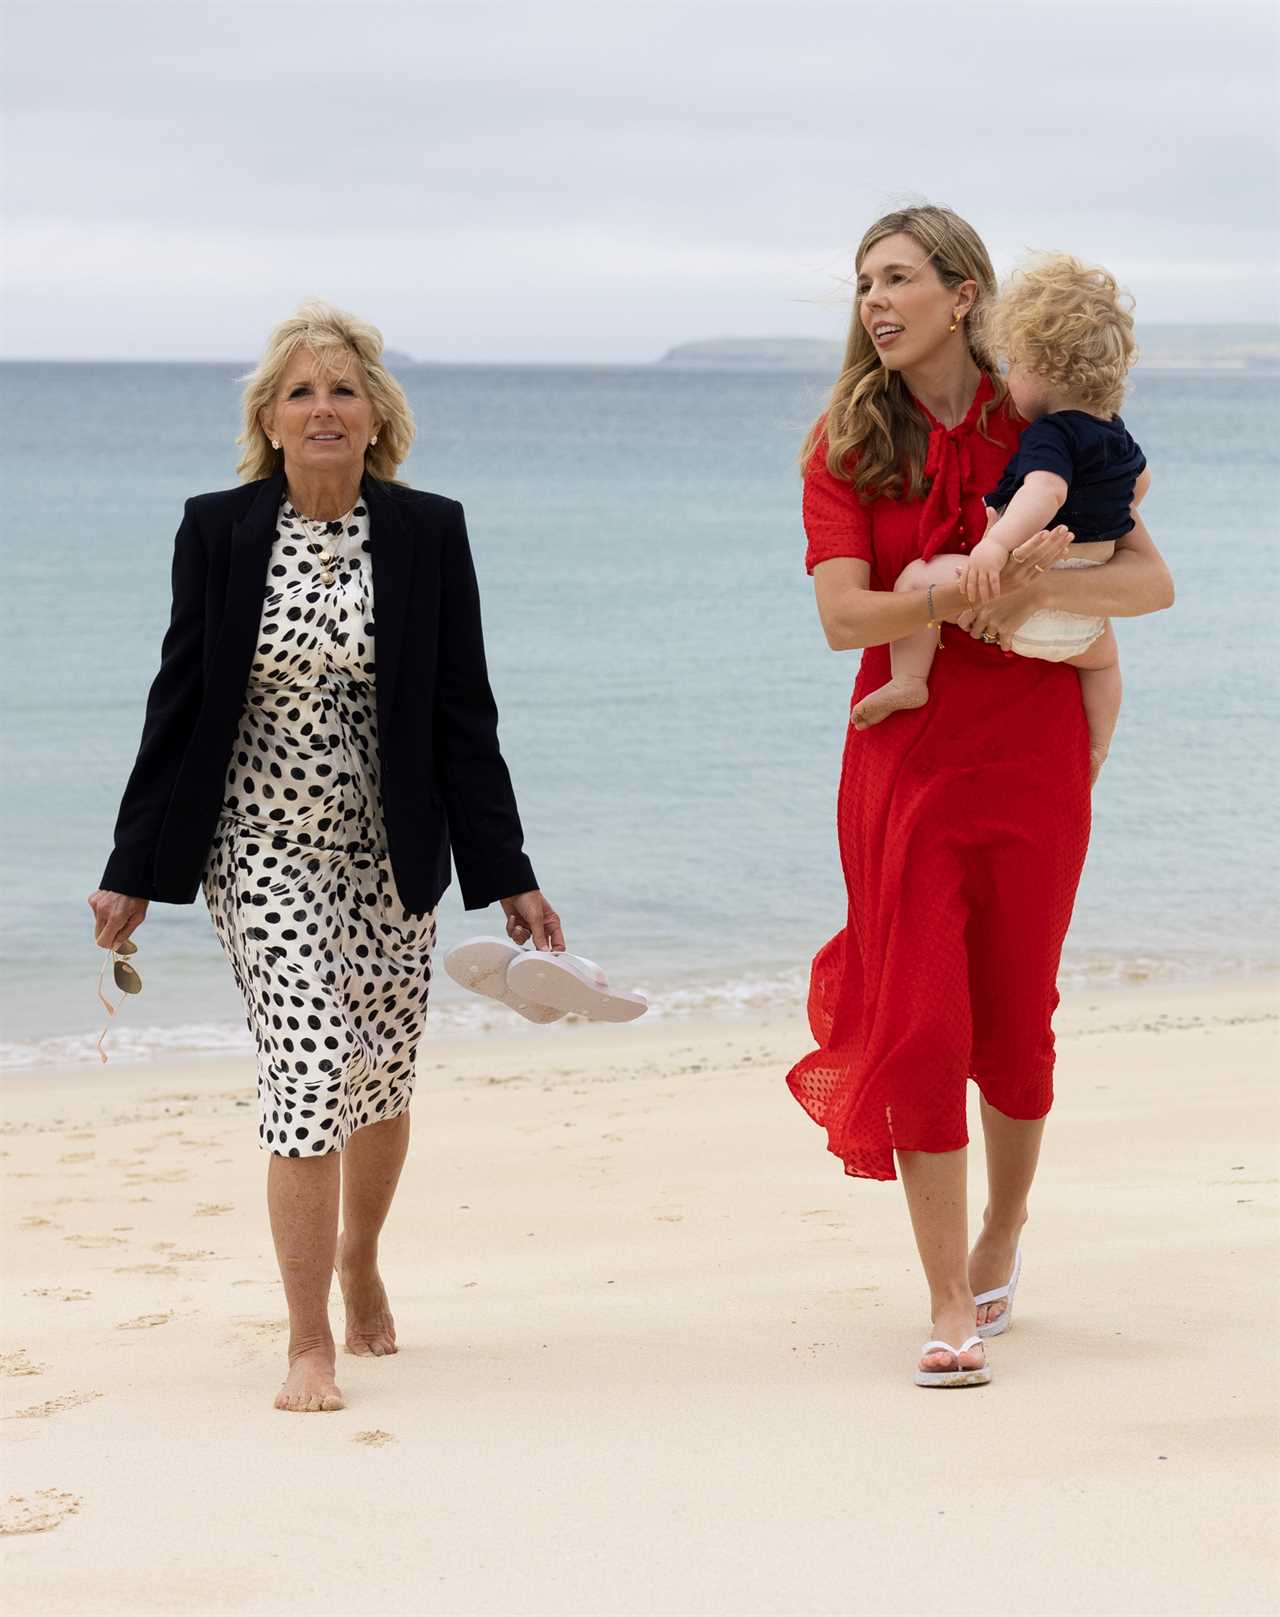 Carrie and Jill on the beach with Wilf